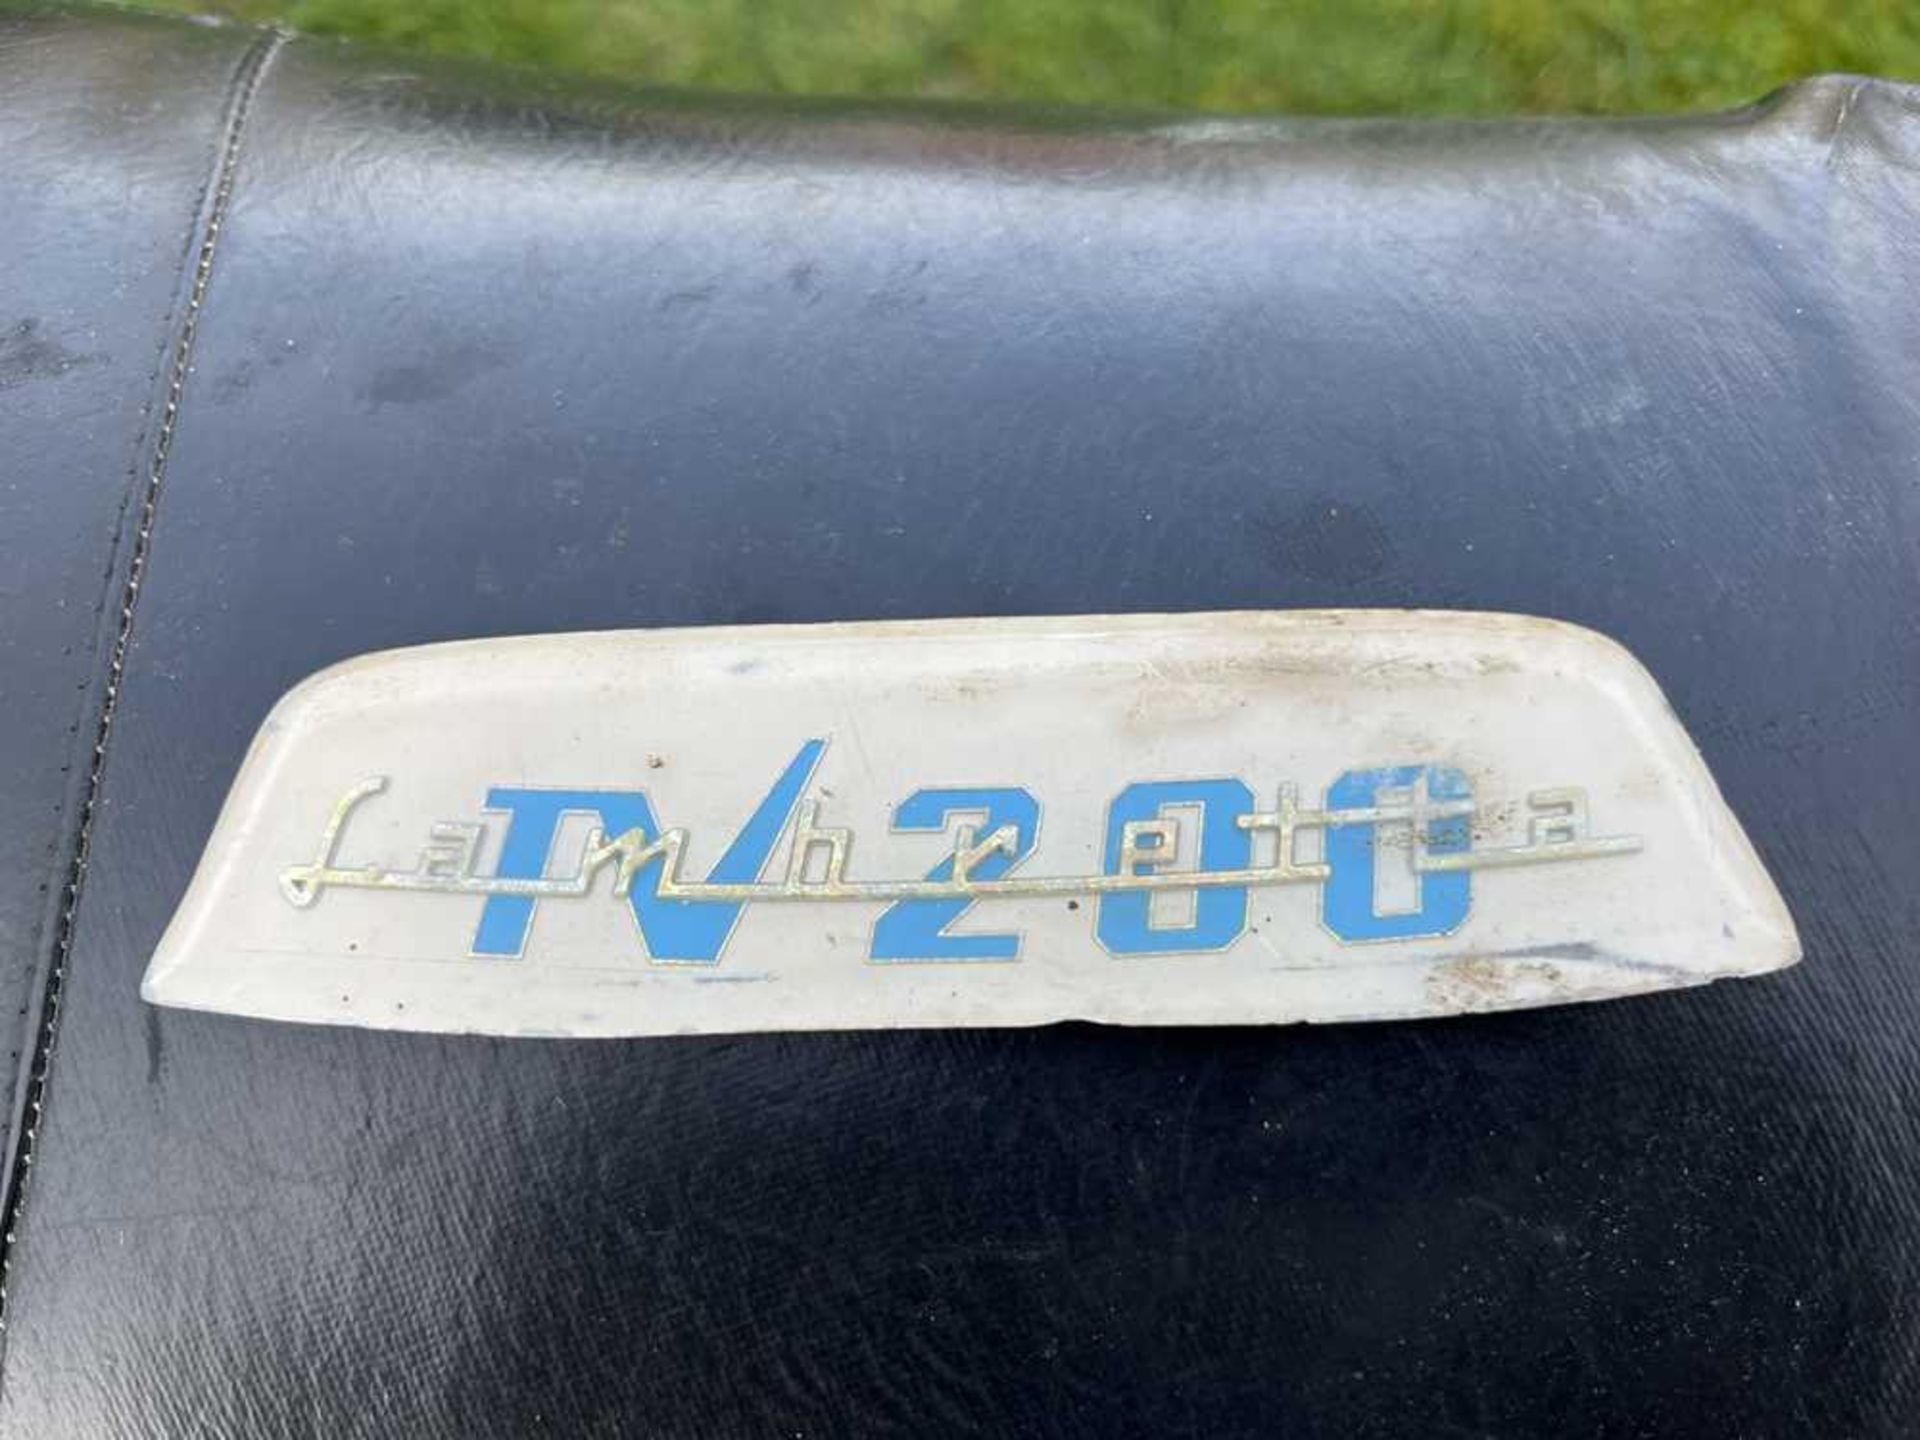 1965 Lambretta GT200 Extremely original with complete provenance - Image 16 of 148